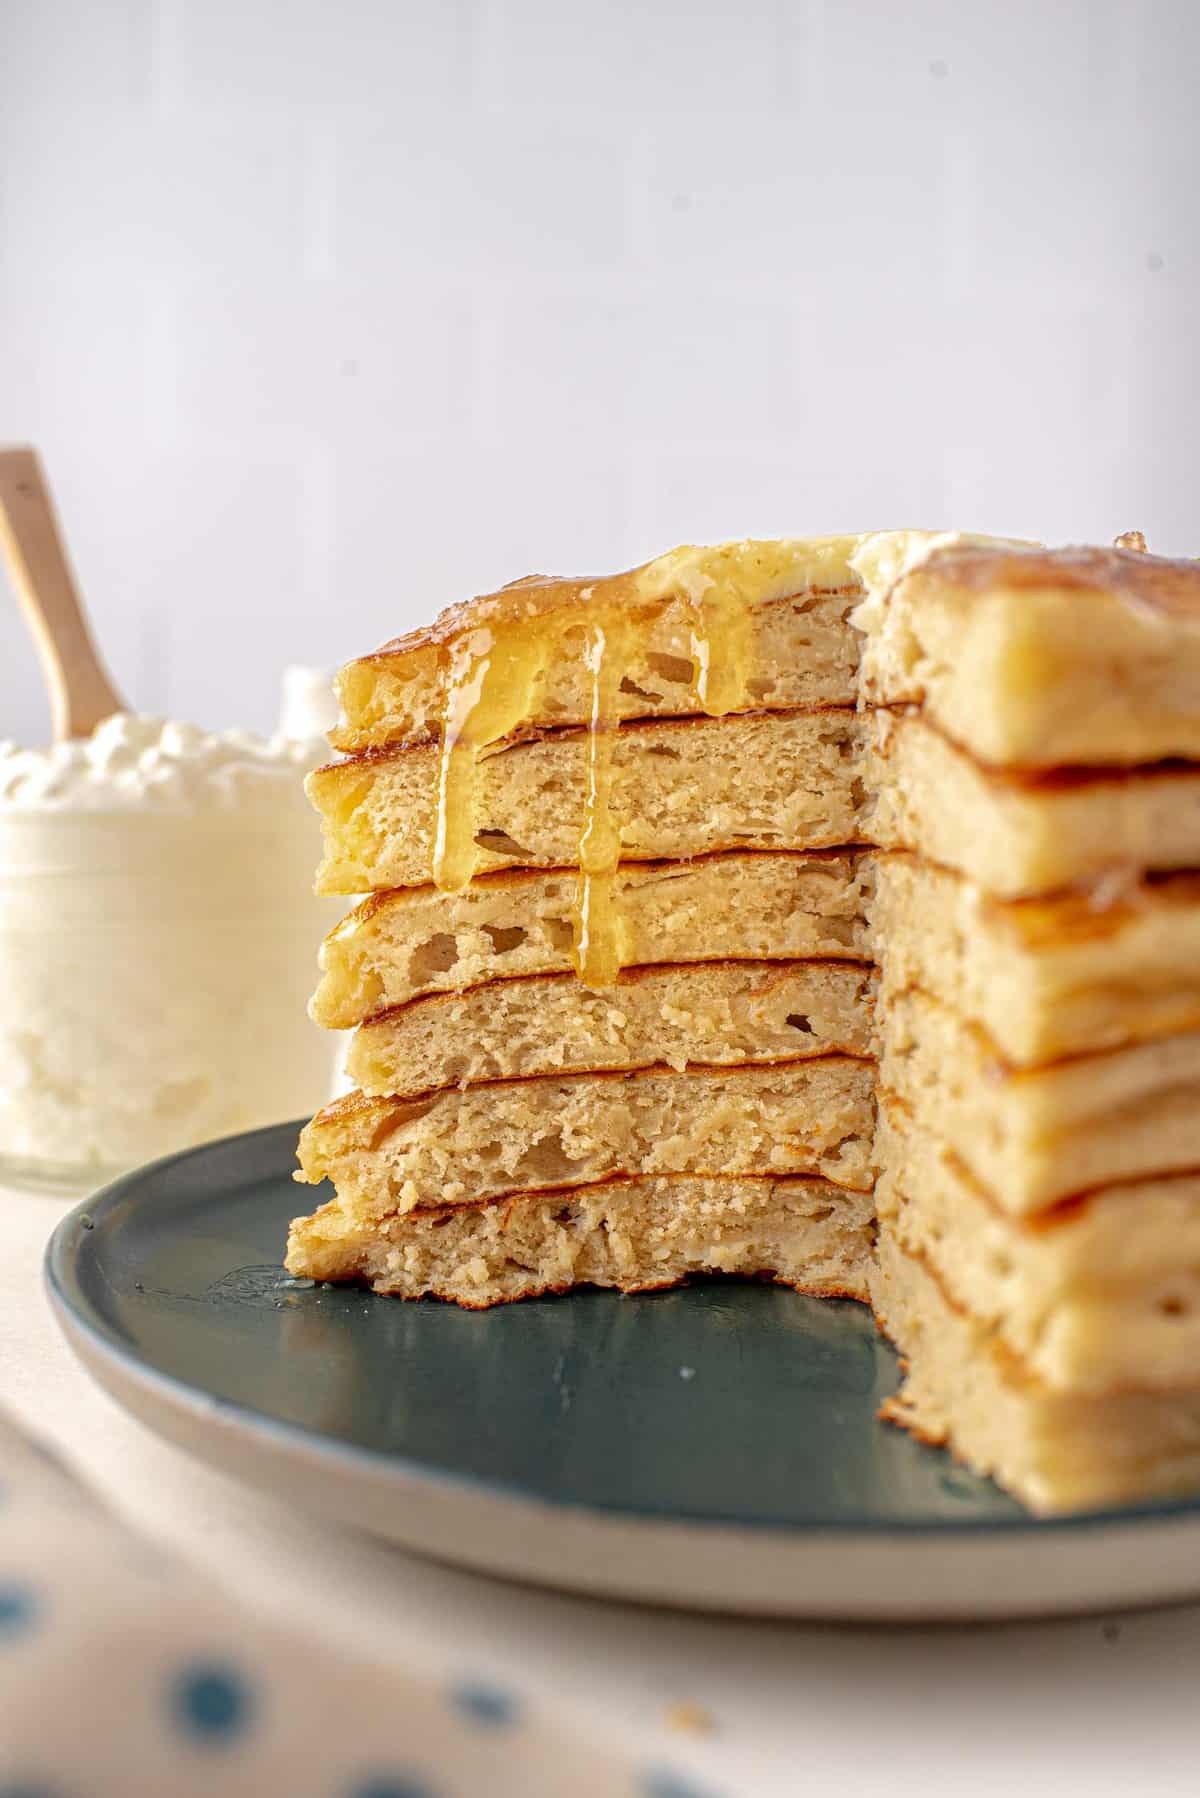 Stack of pancakes, cut to show texture, syrup dripping down cut edge.